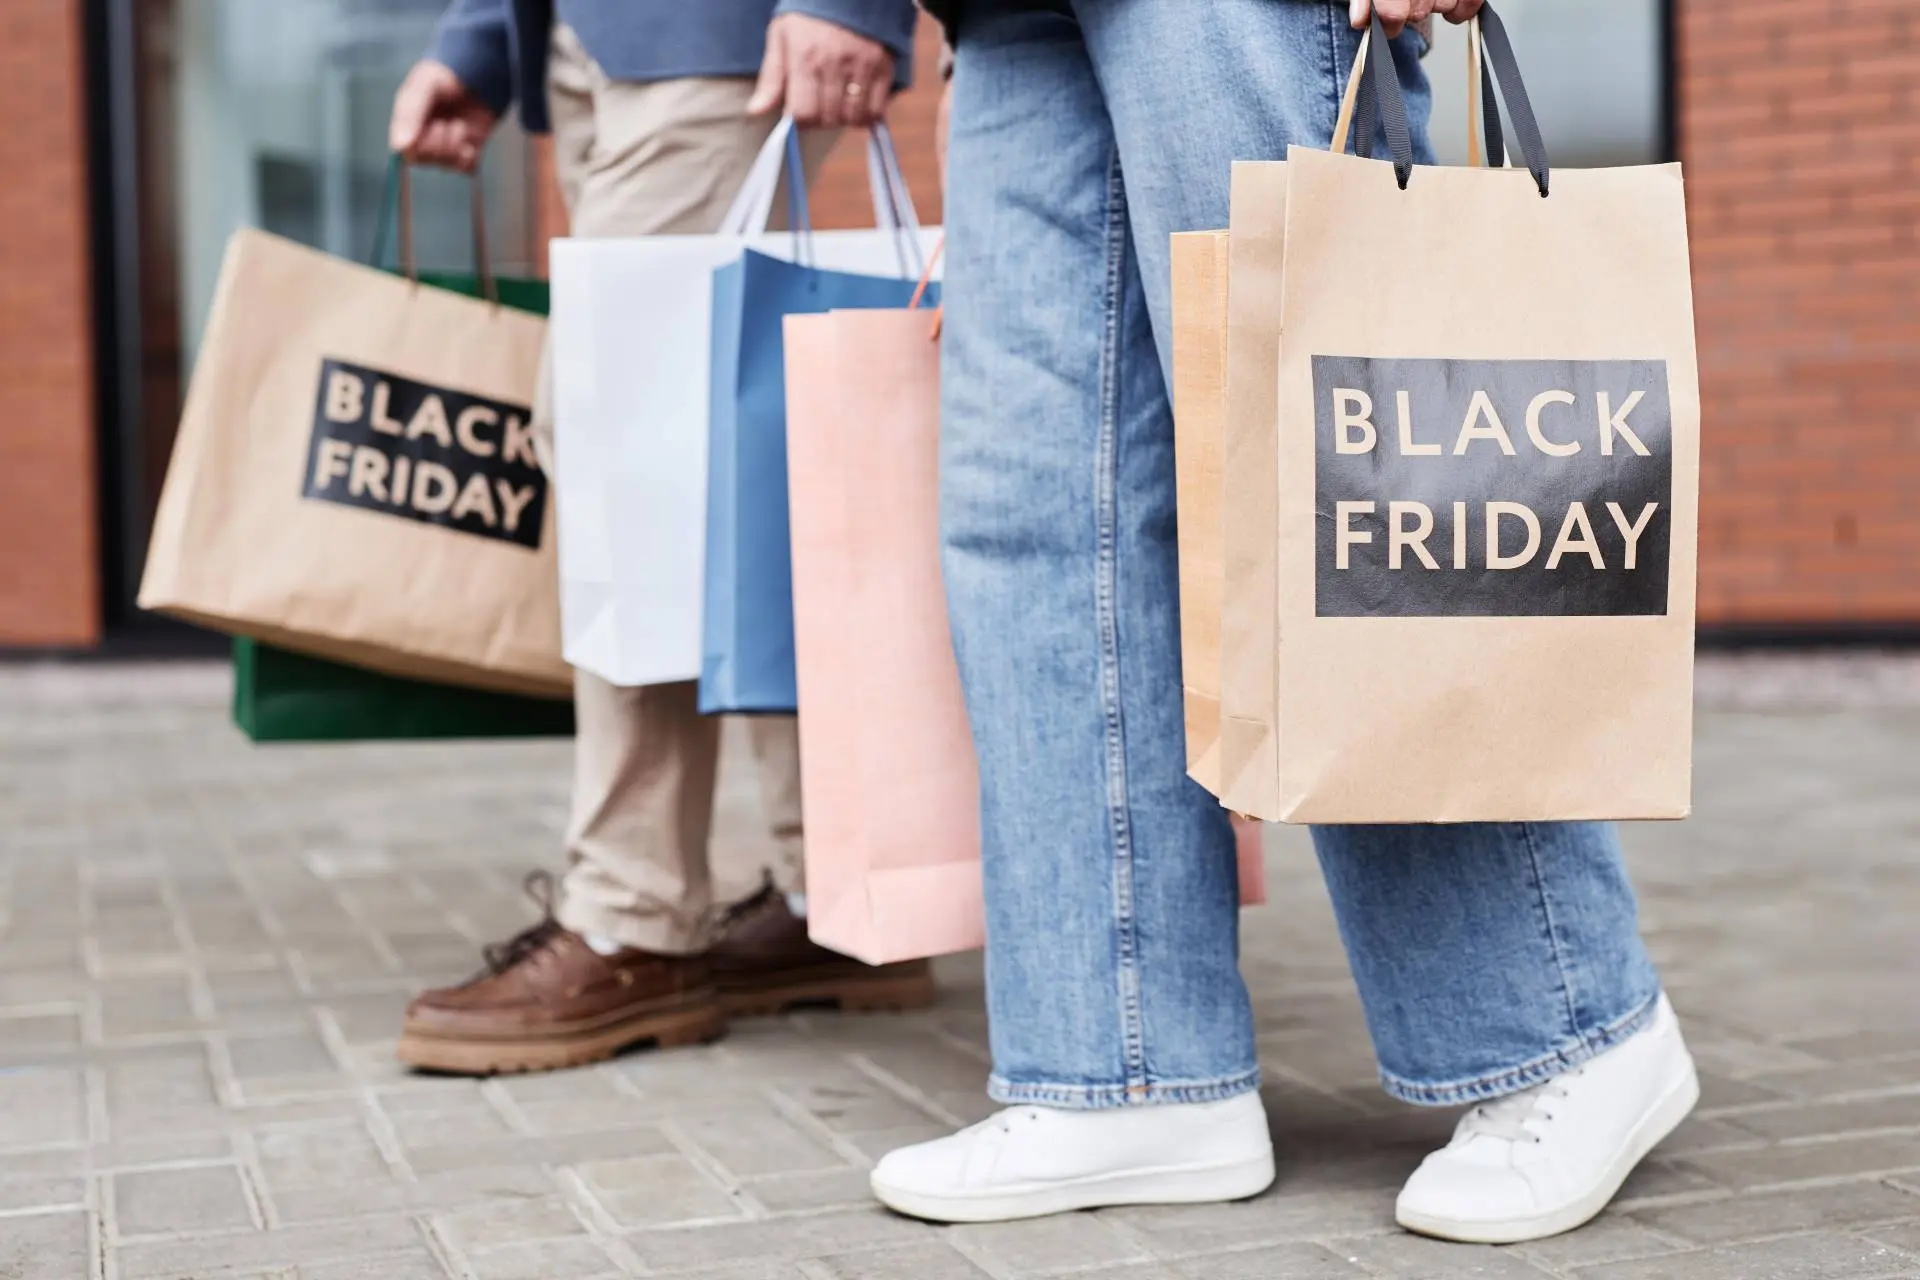 customers carrying bags after purchasing items from black friday sale of a small business